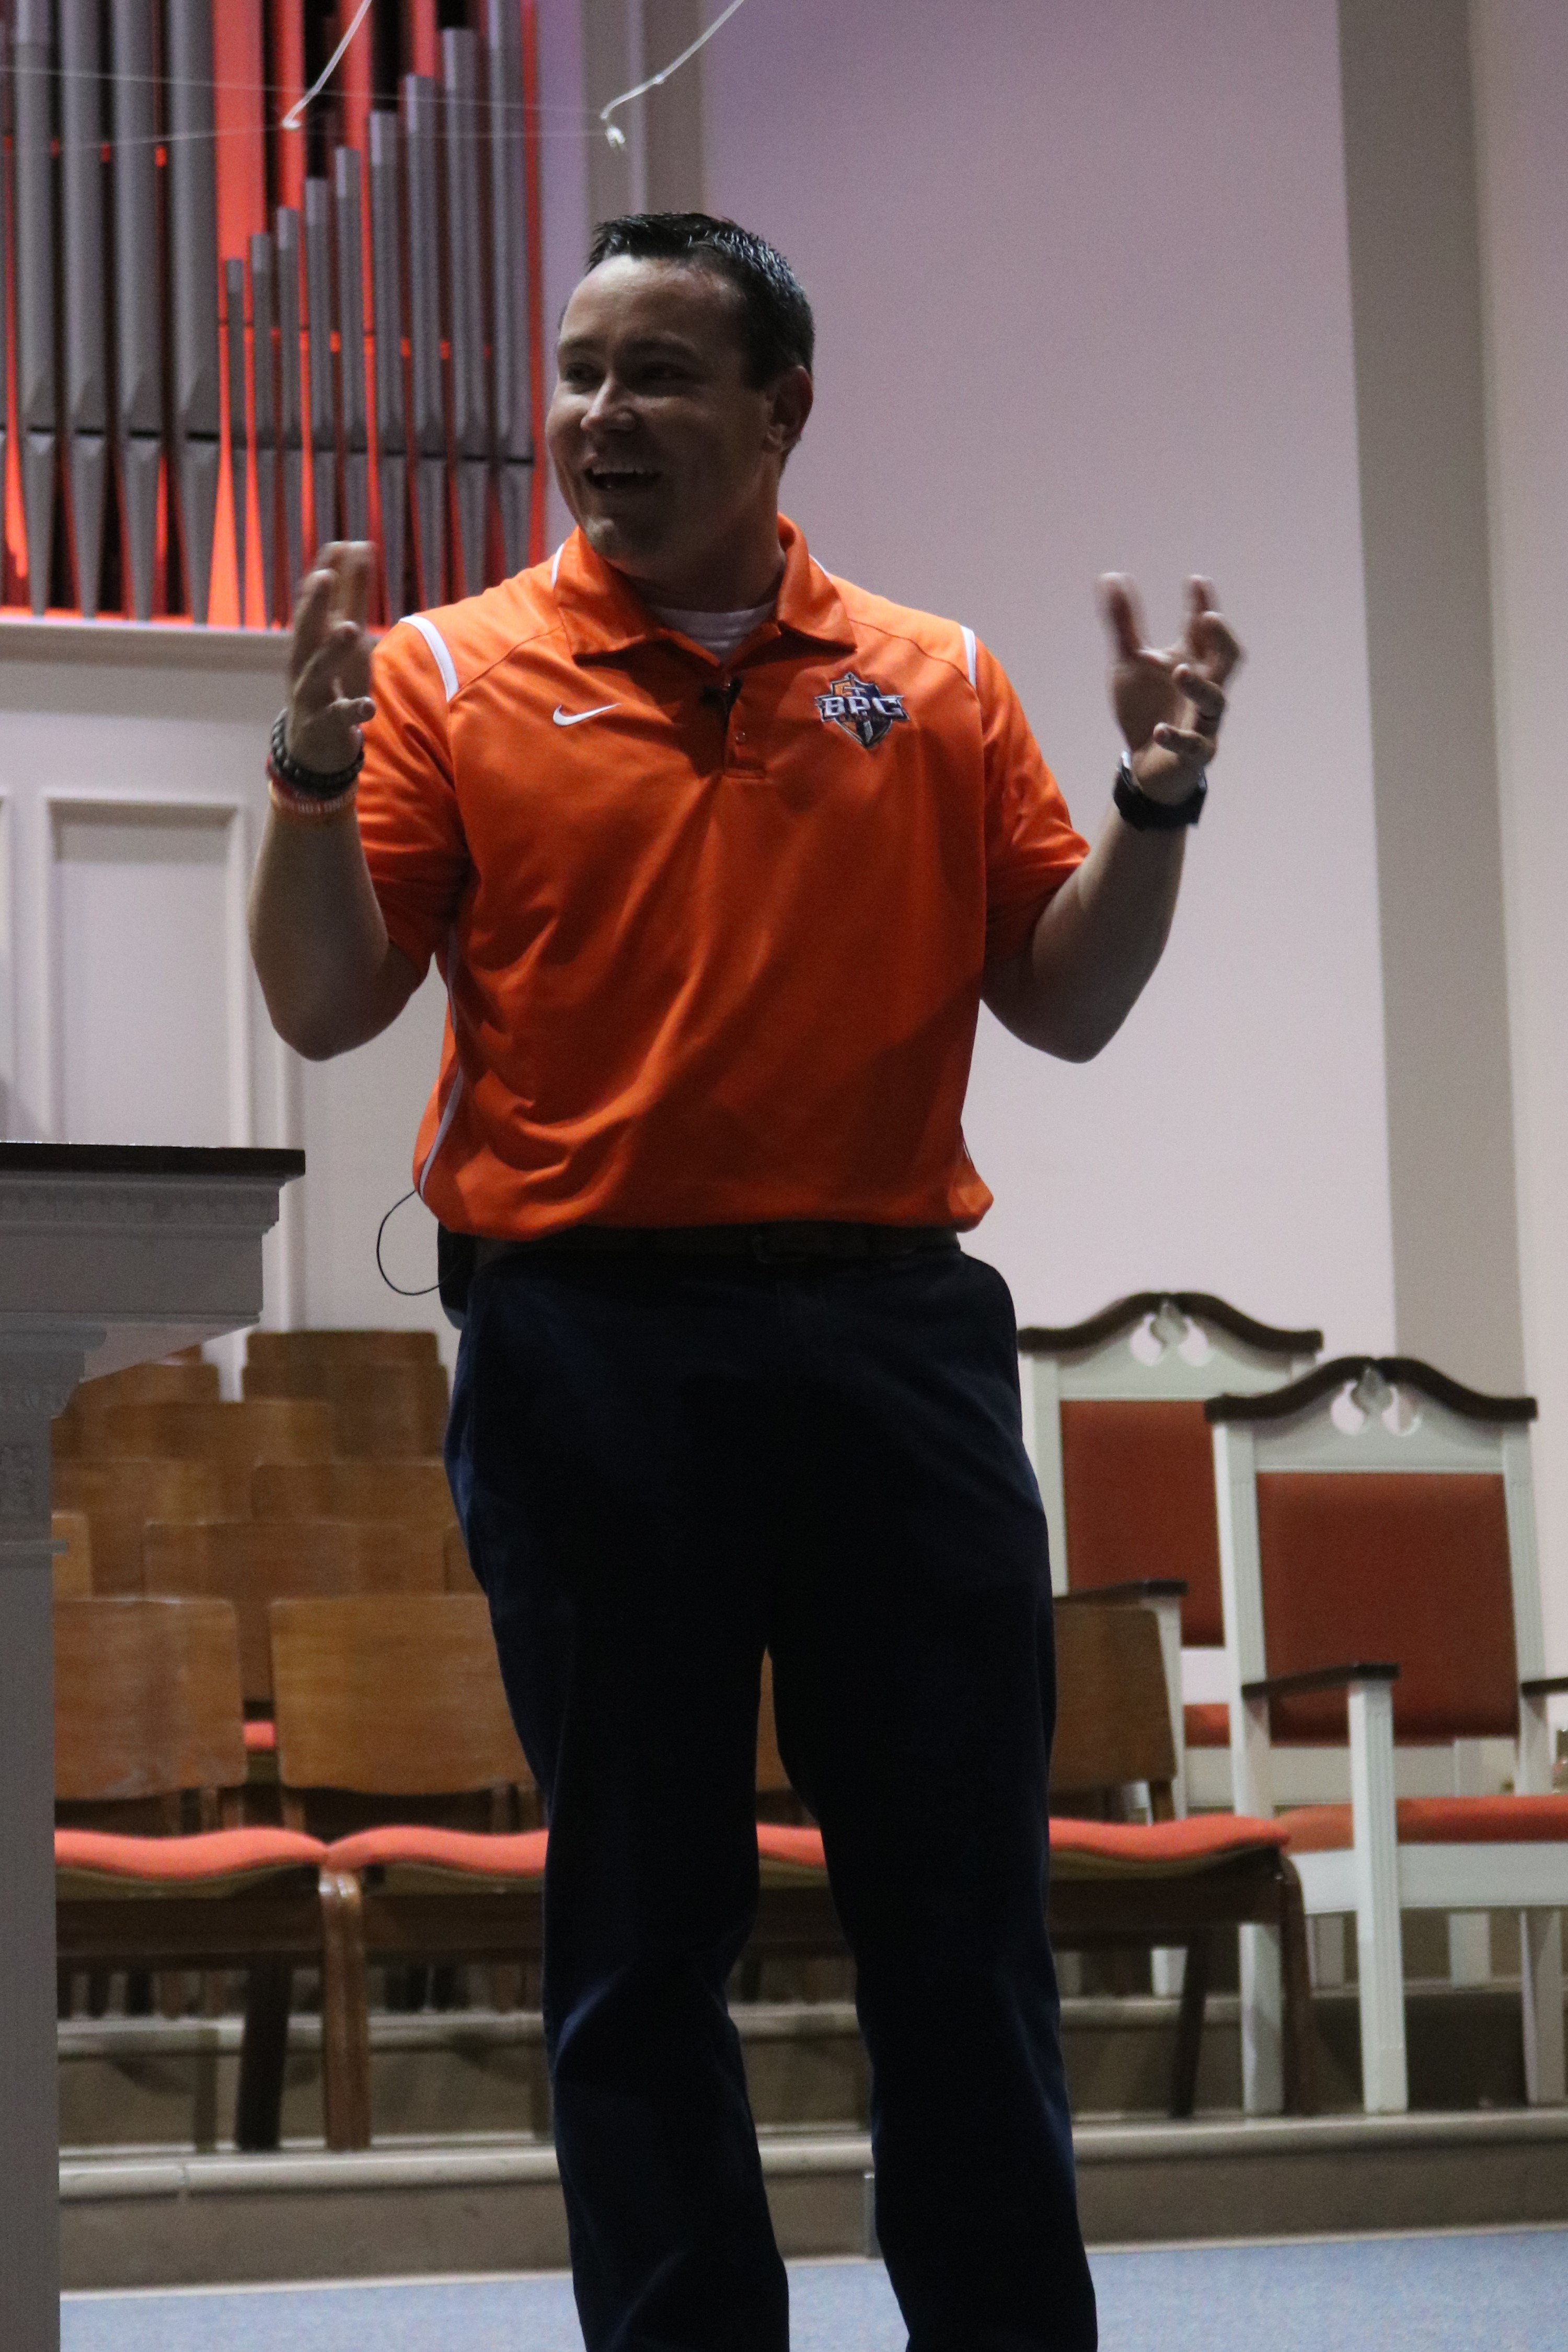 “A lot of times we, as Christians, try to find our value in other people, but the approval of others shouldn’t be where we find our value,” Coach Madison Herrin shared during Brewton-Parker College’s February 13 chapel service. (Photo Credit: Jose Carrillo-Garcia)